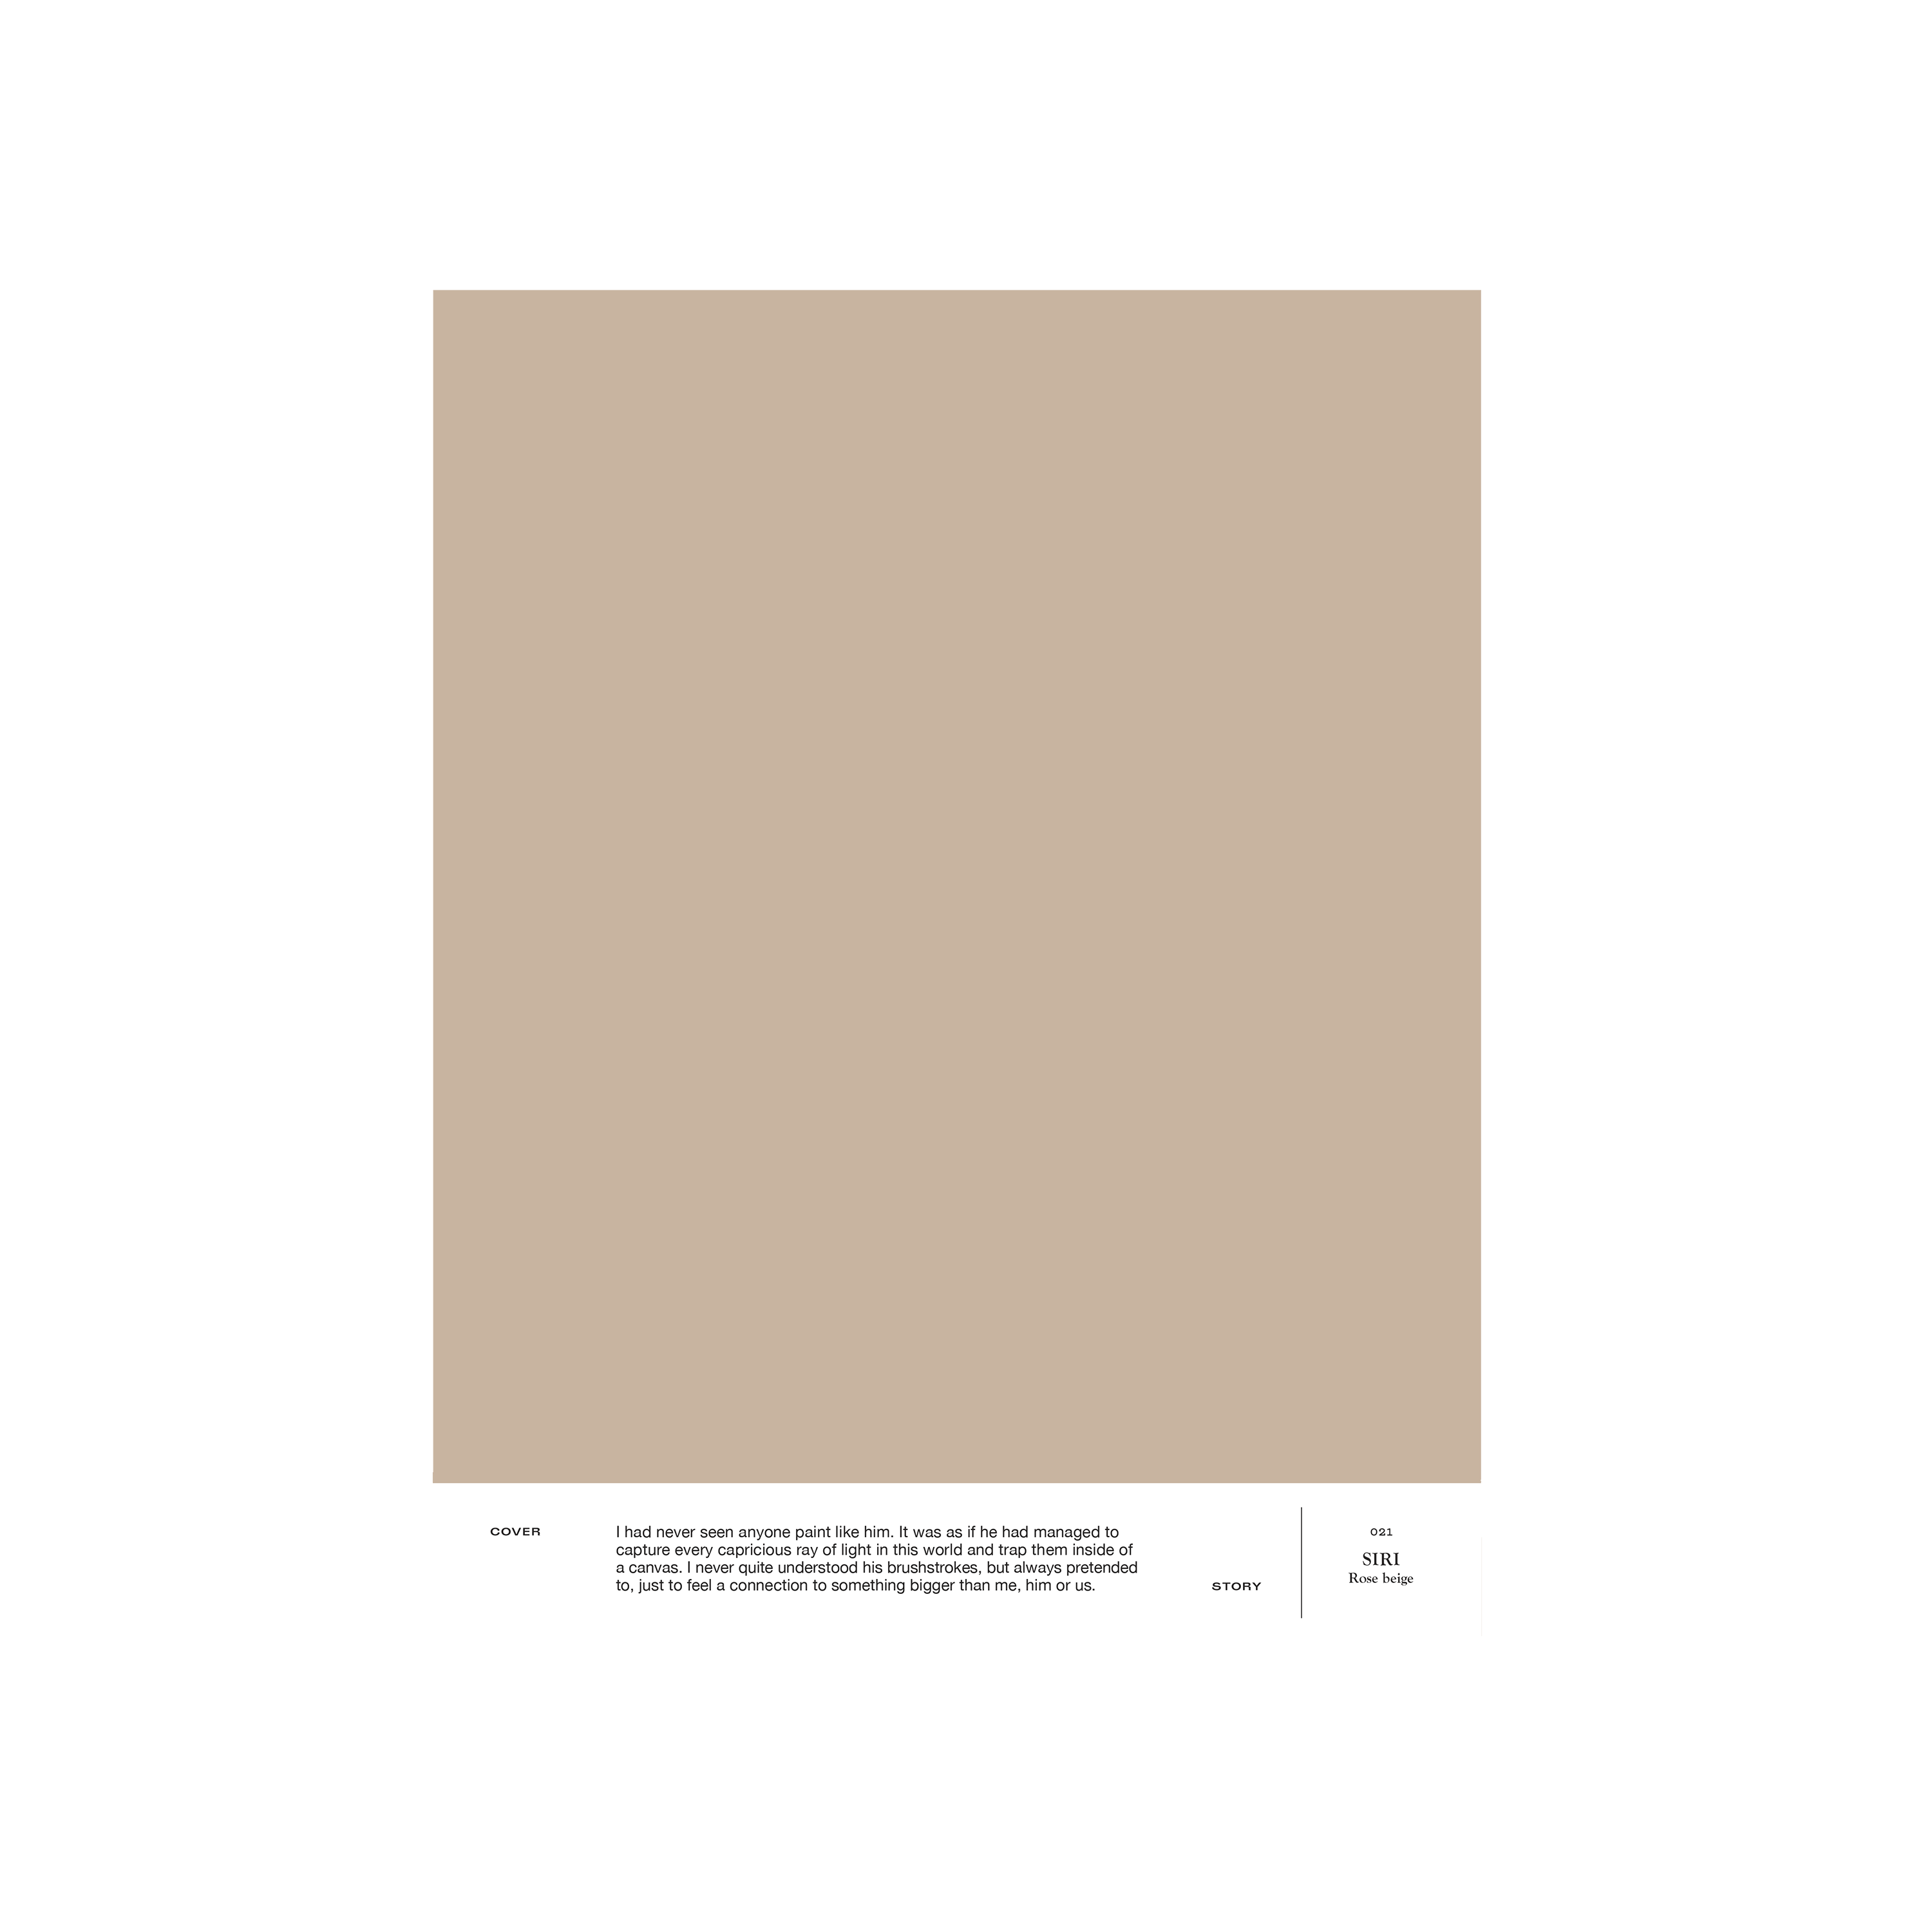 Rose-beige interior paint Cover Story 021 SIRI